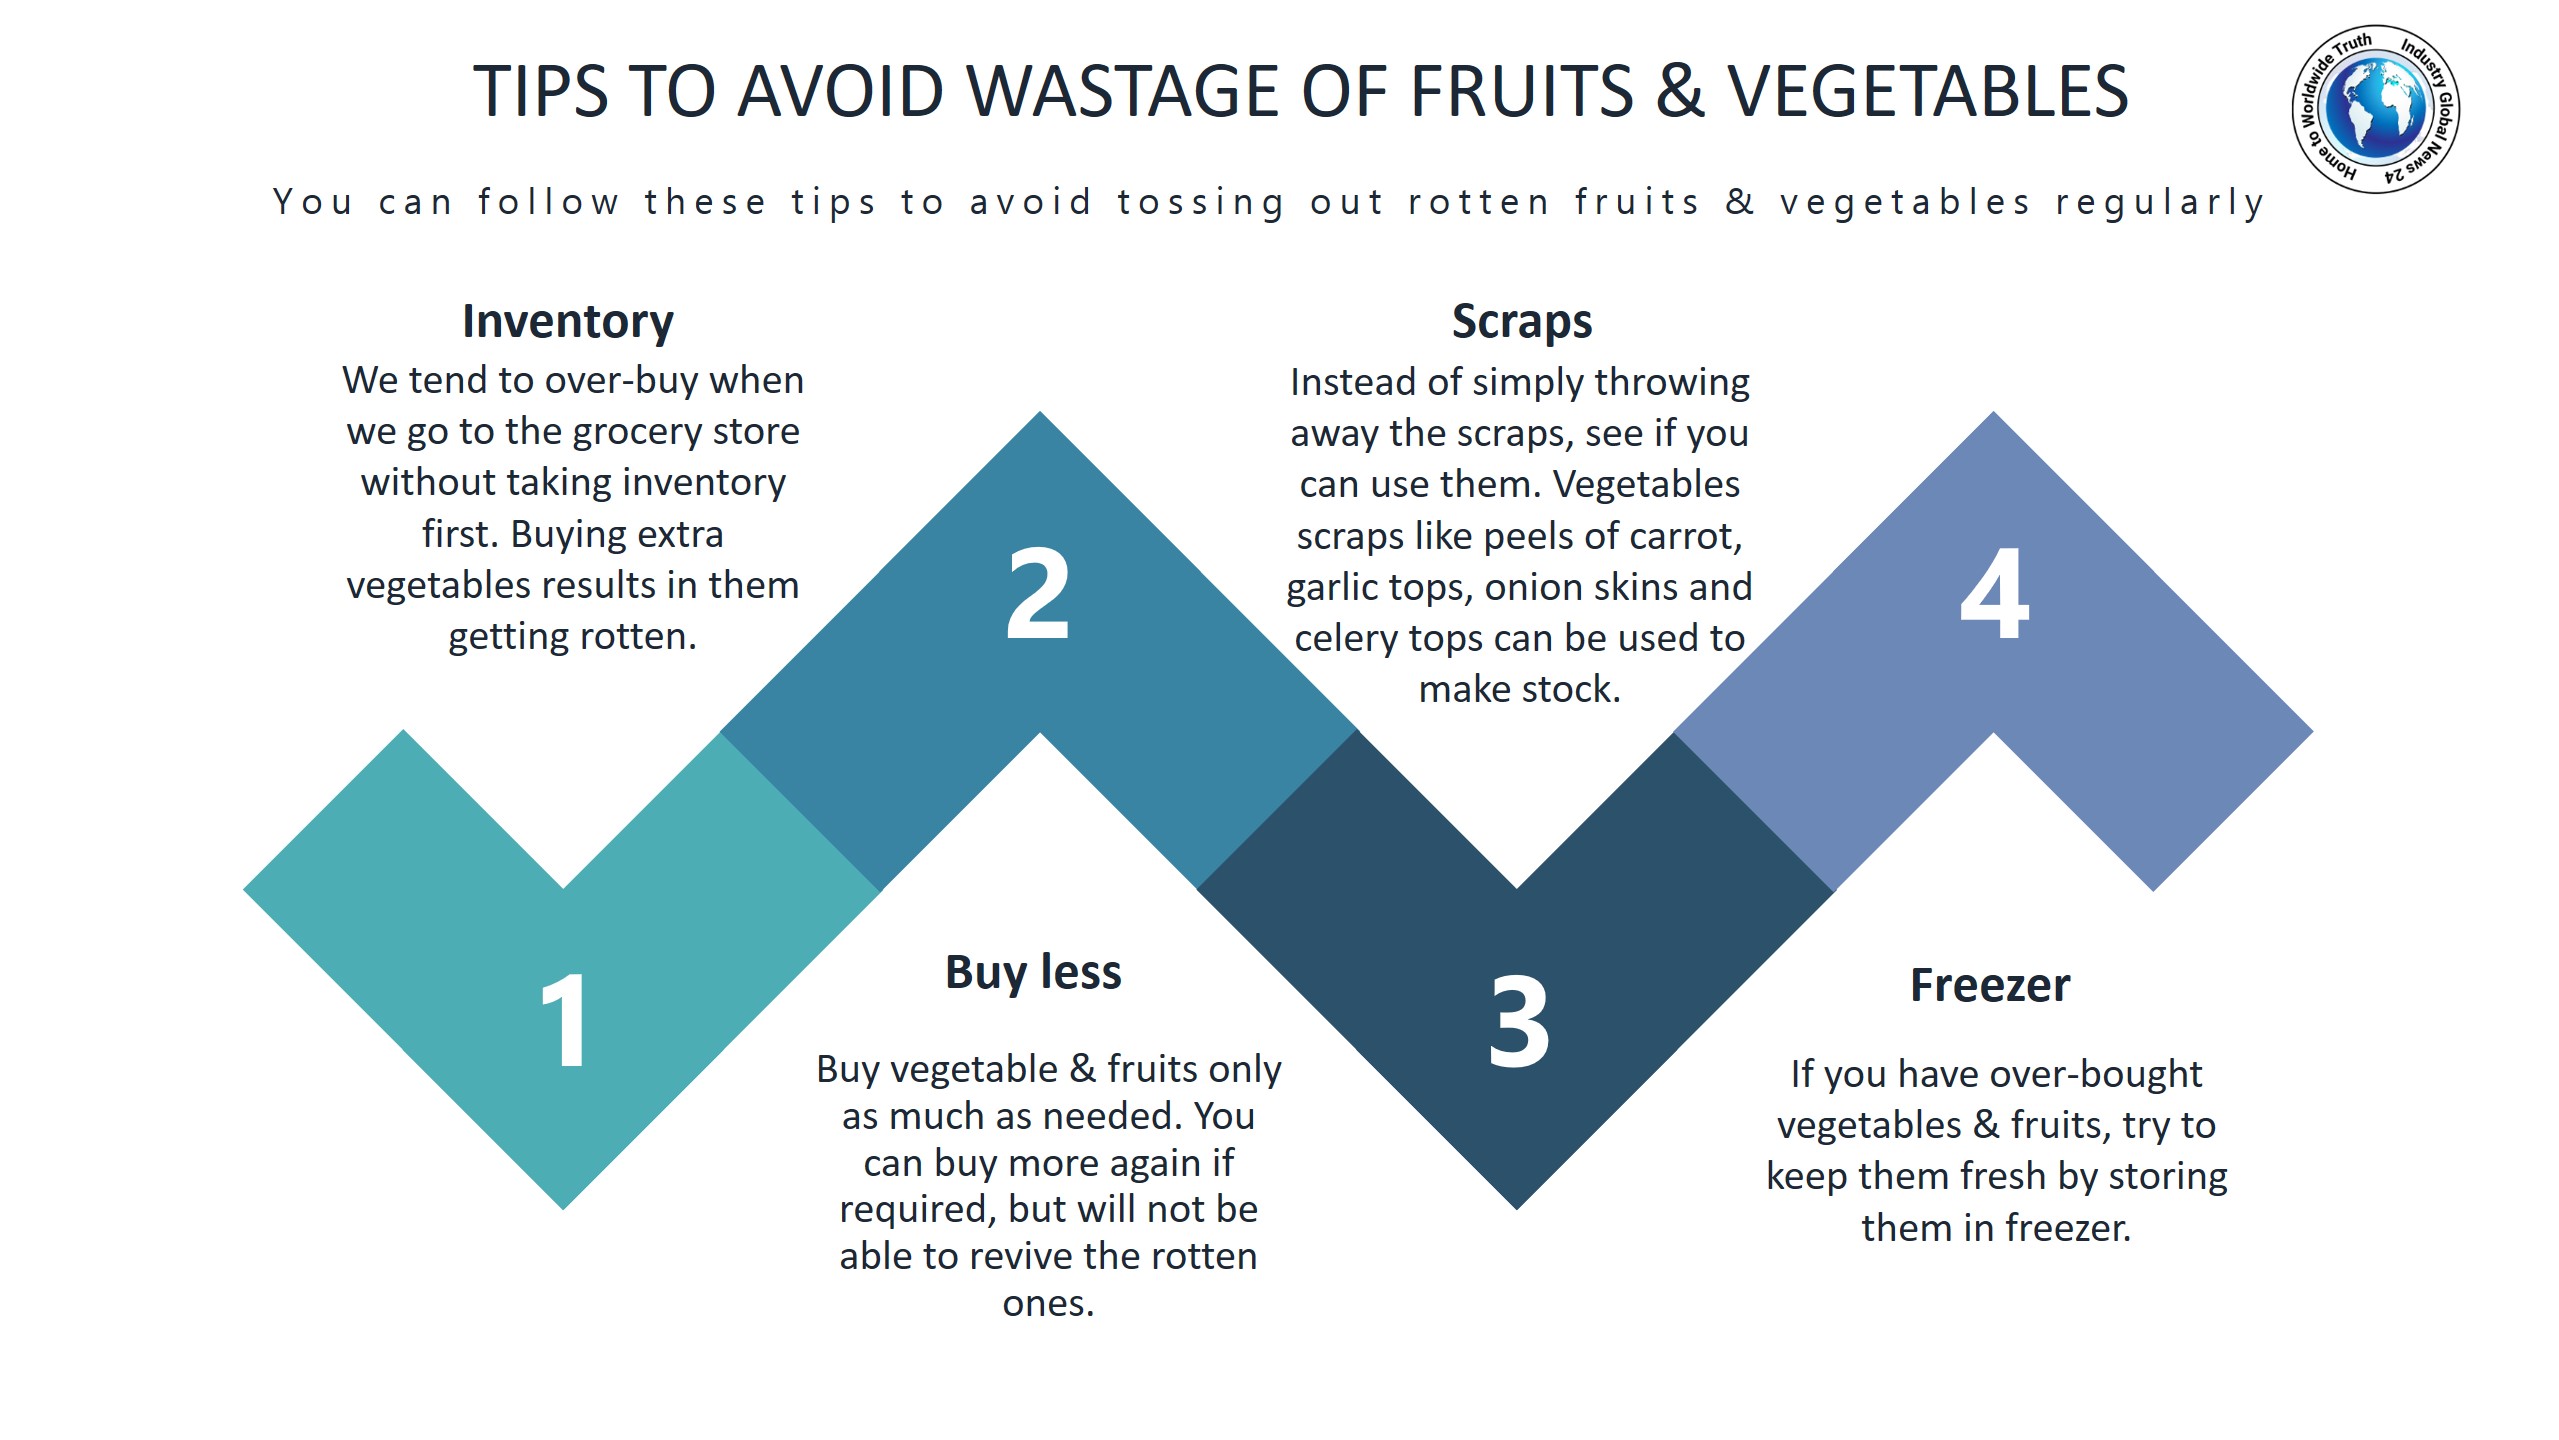 Tips to avoid wastage of fruits & vegetables